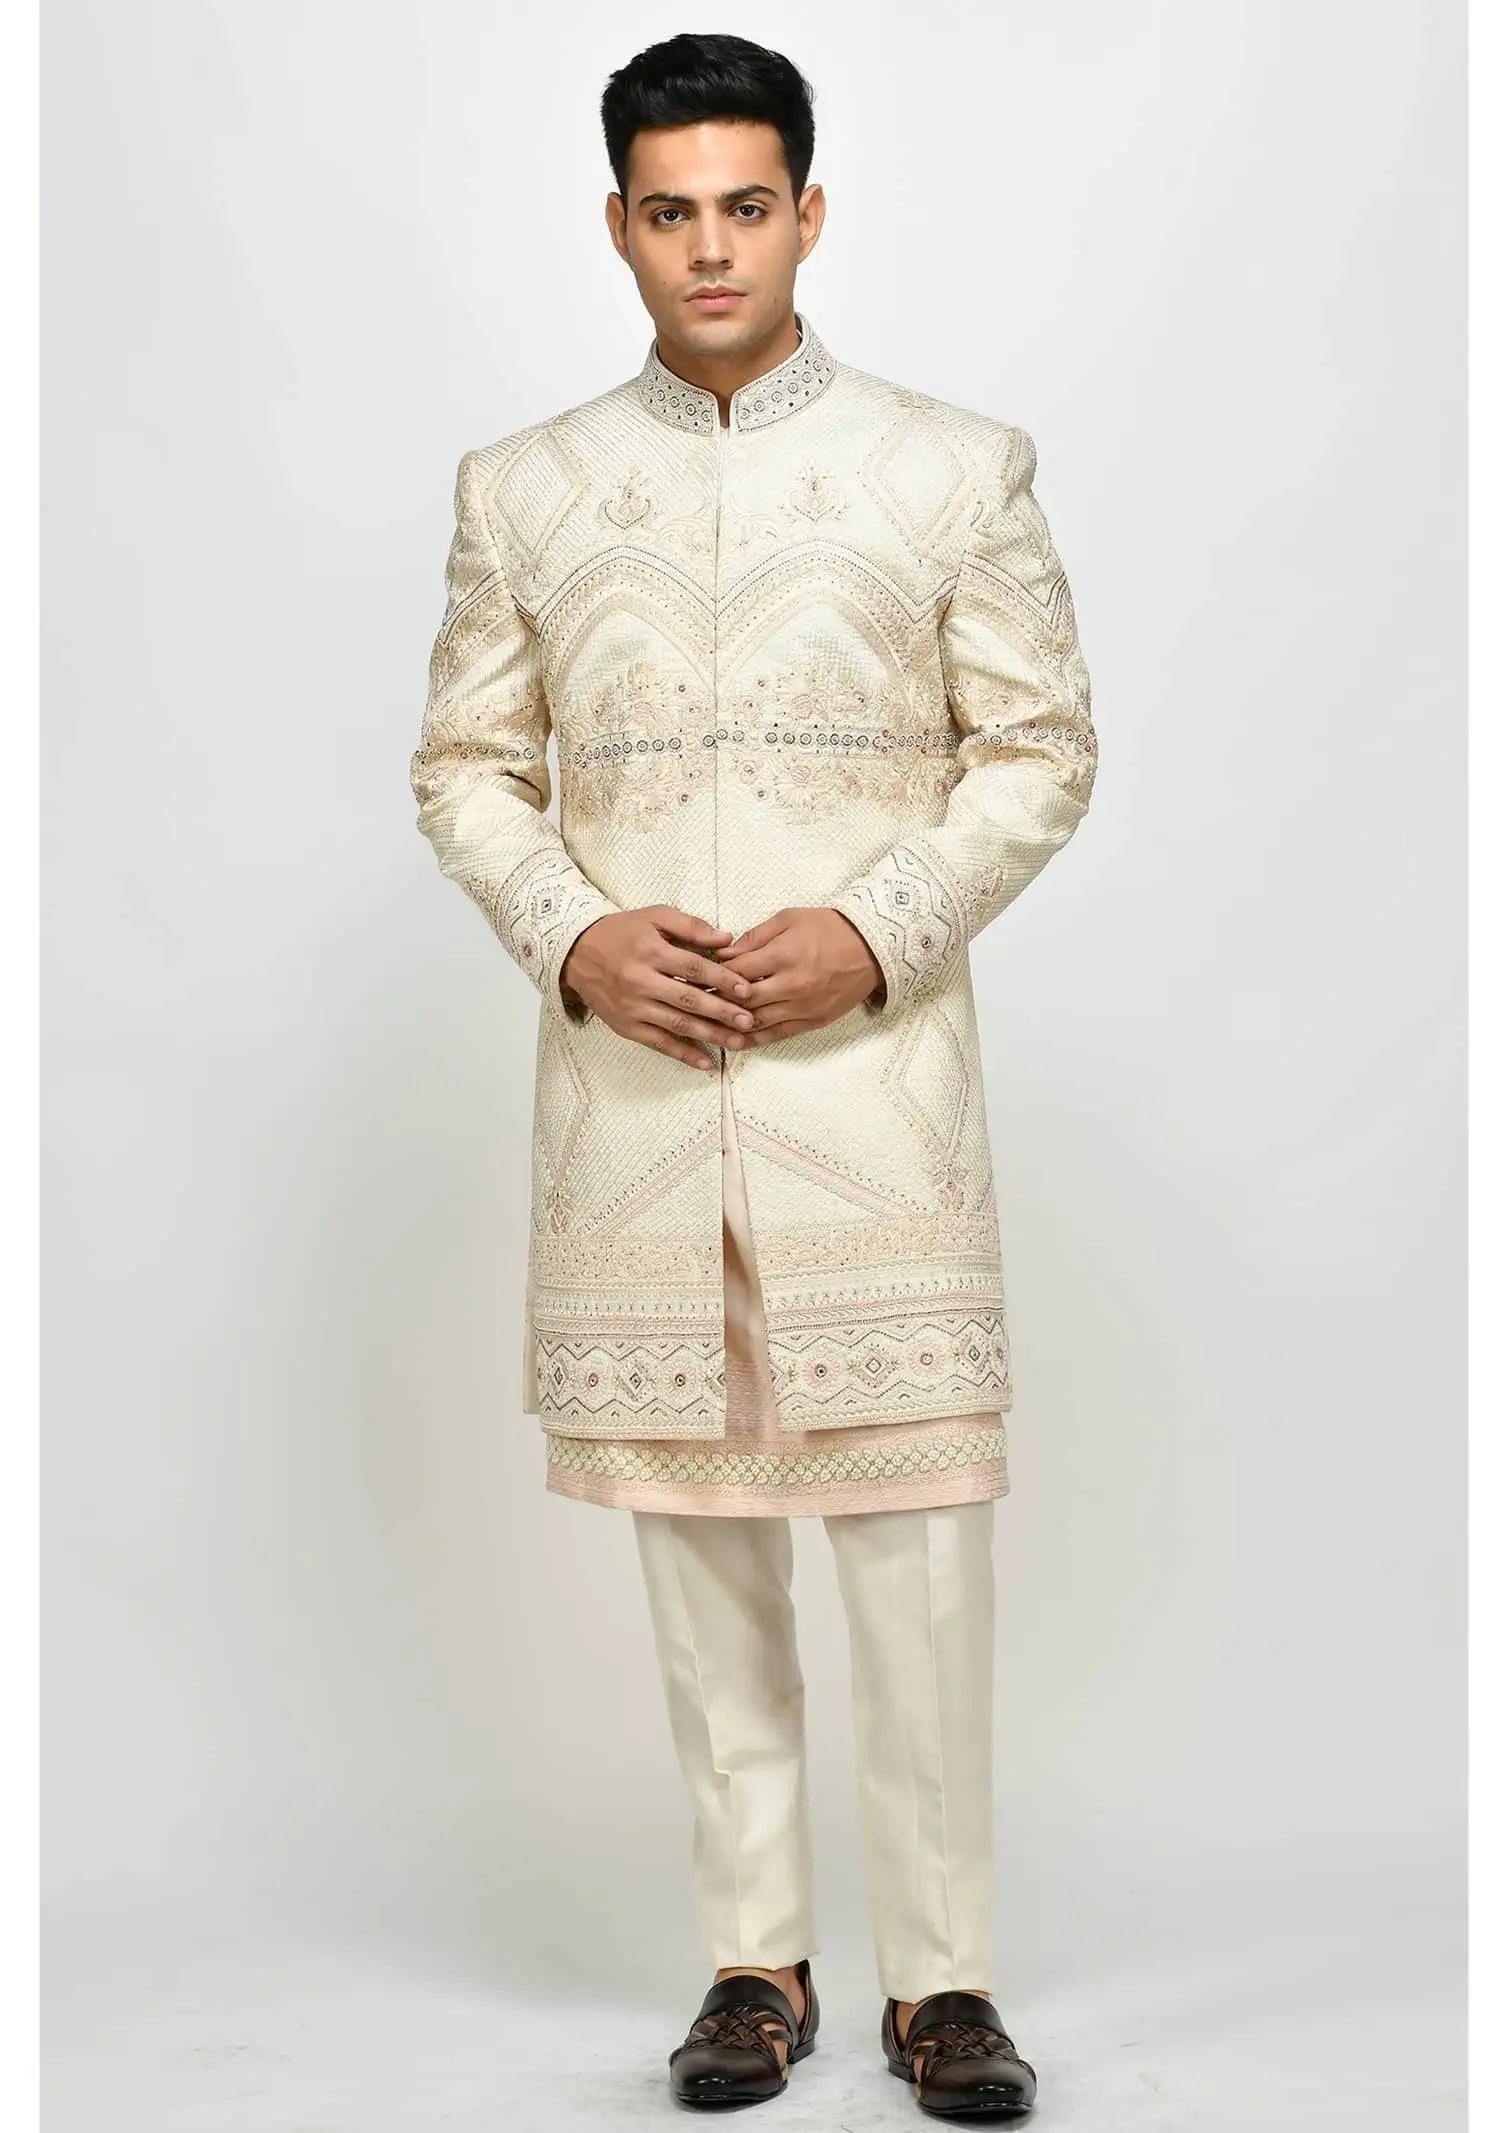 Quilted Bandgala style Achkan with Mughal patterns